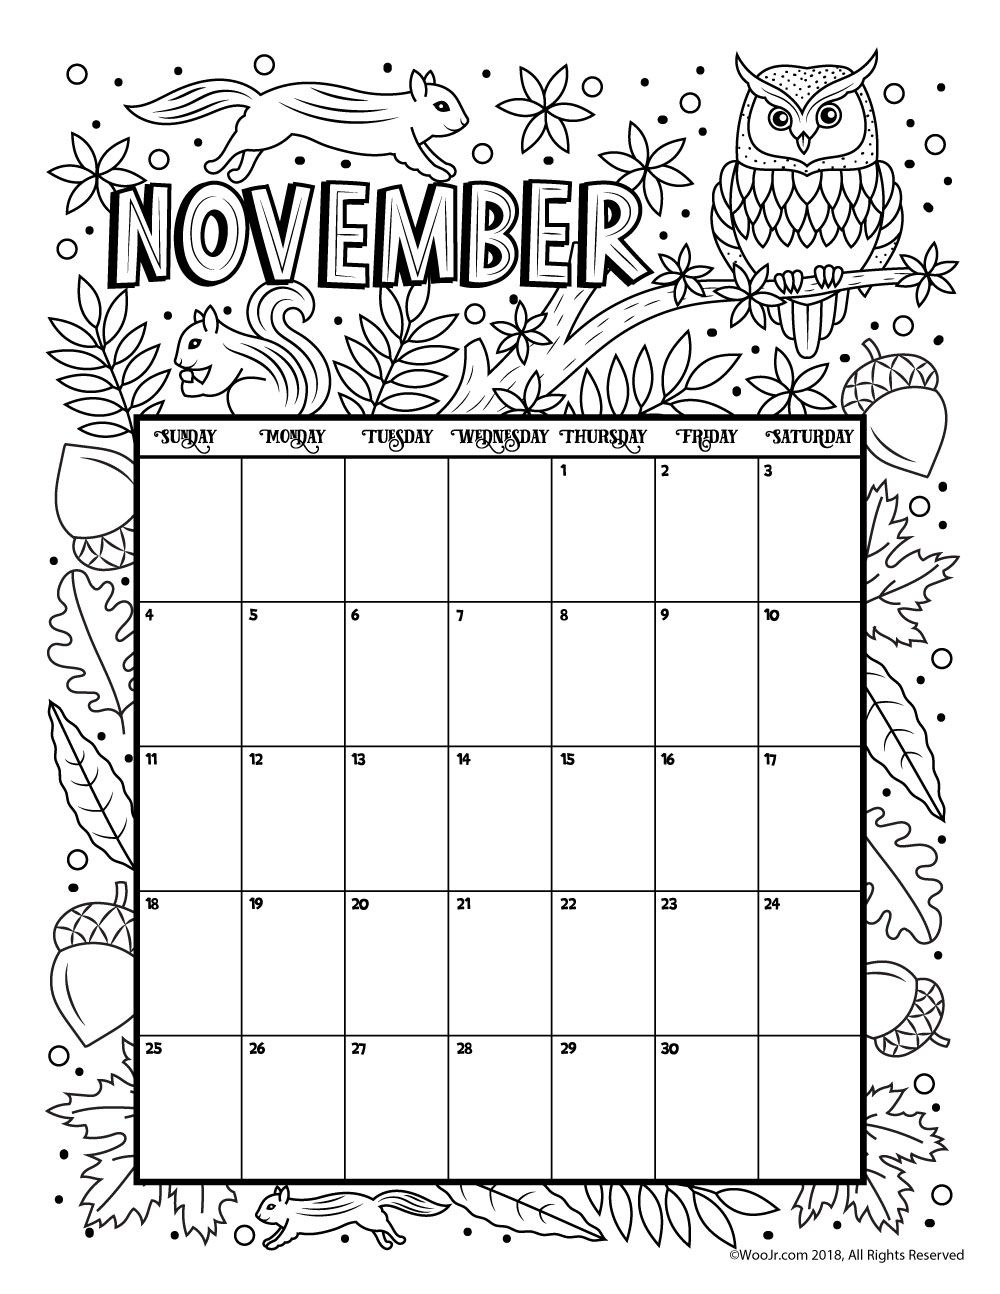 Coloring Book : Free Printable Coloring Calendar For Adults